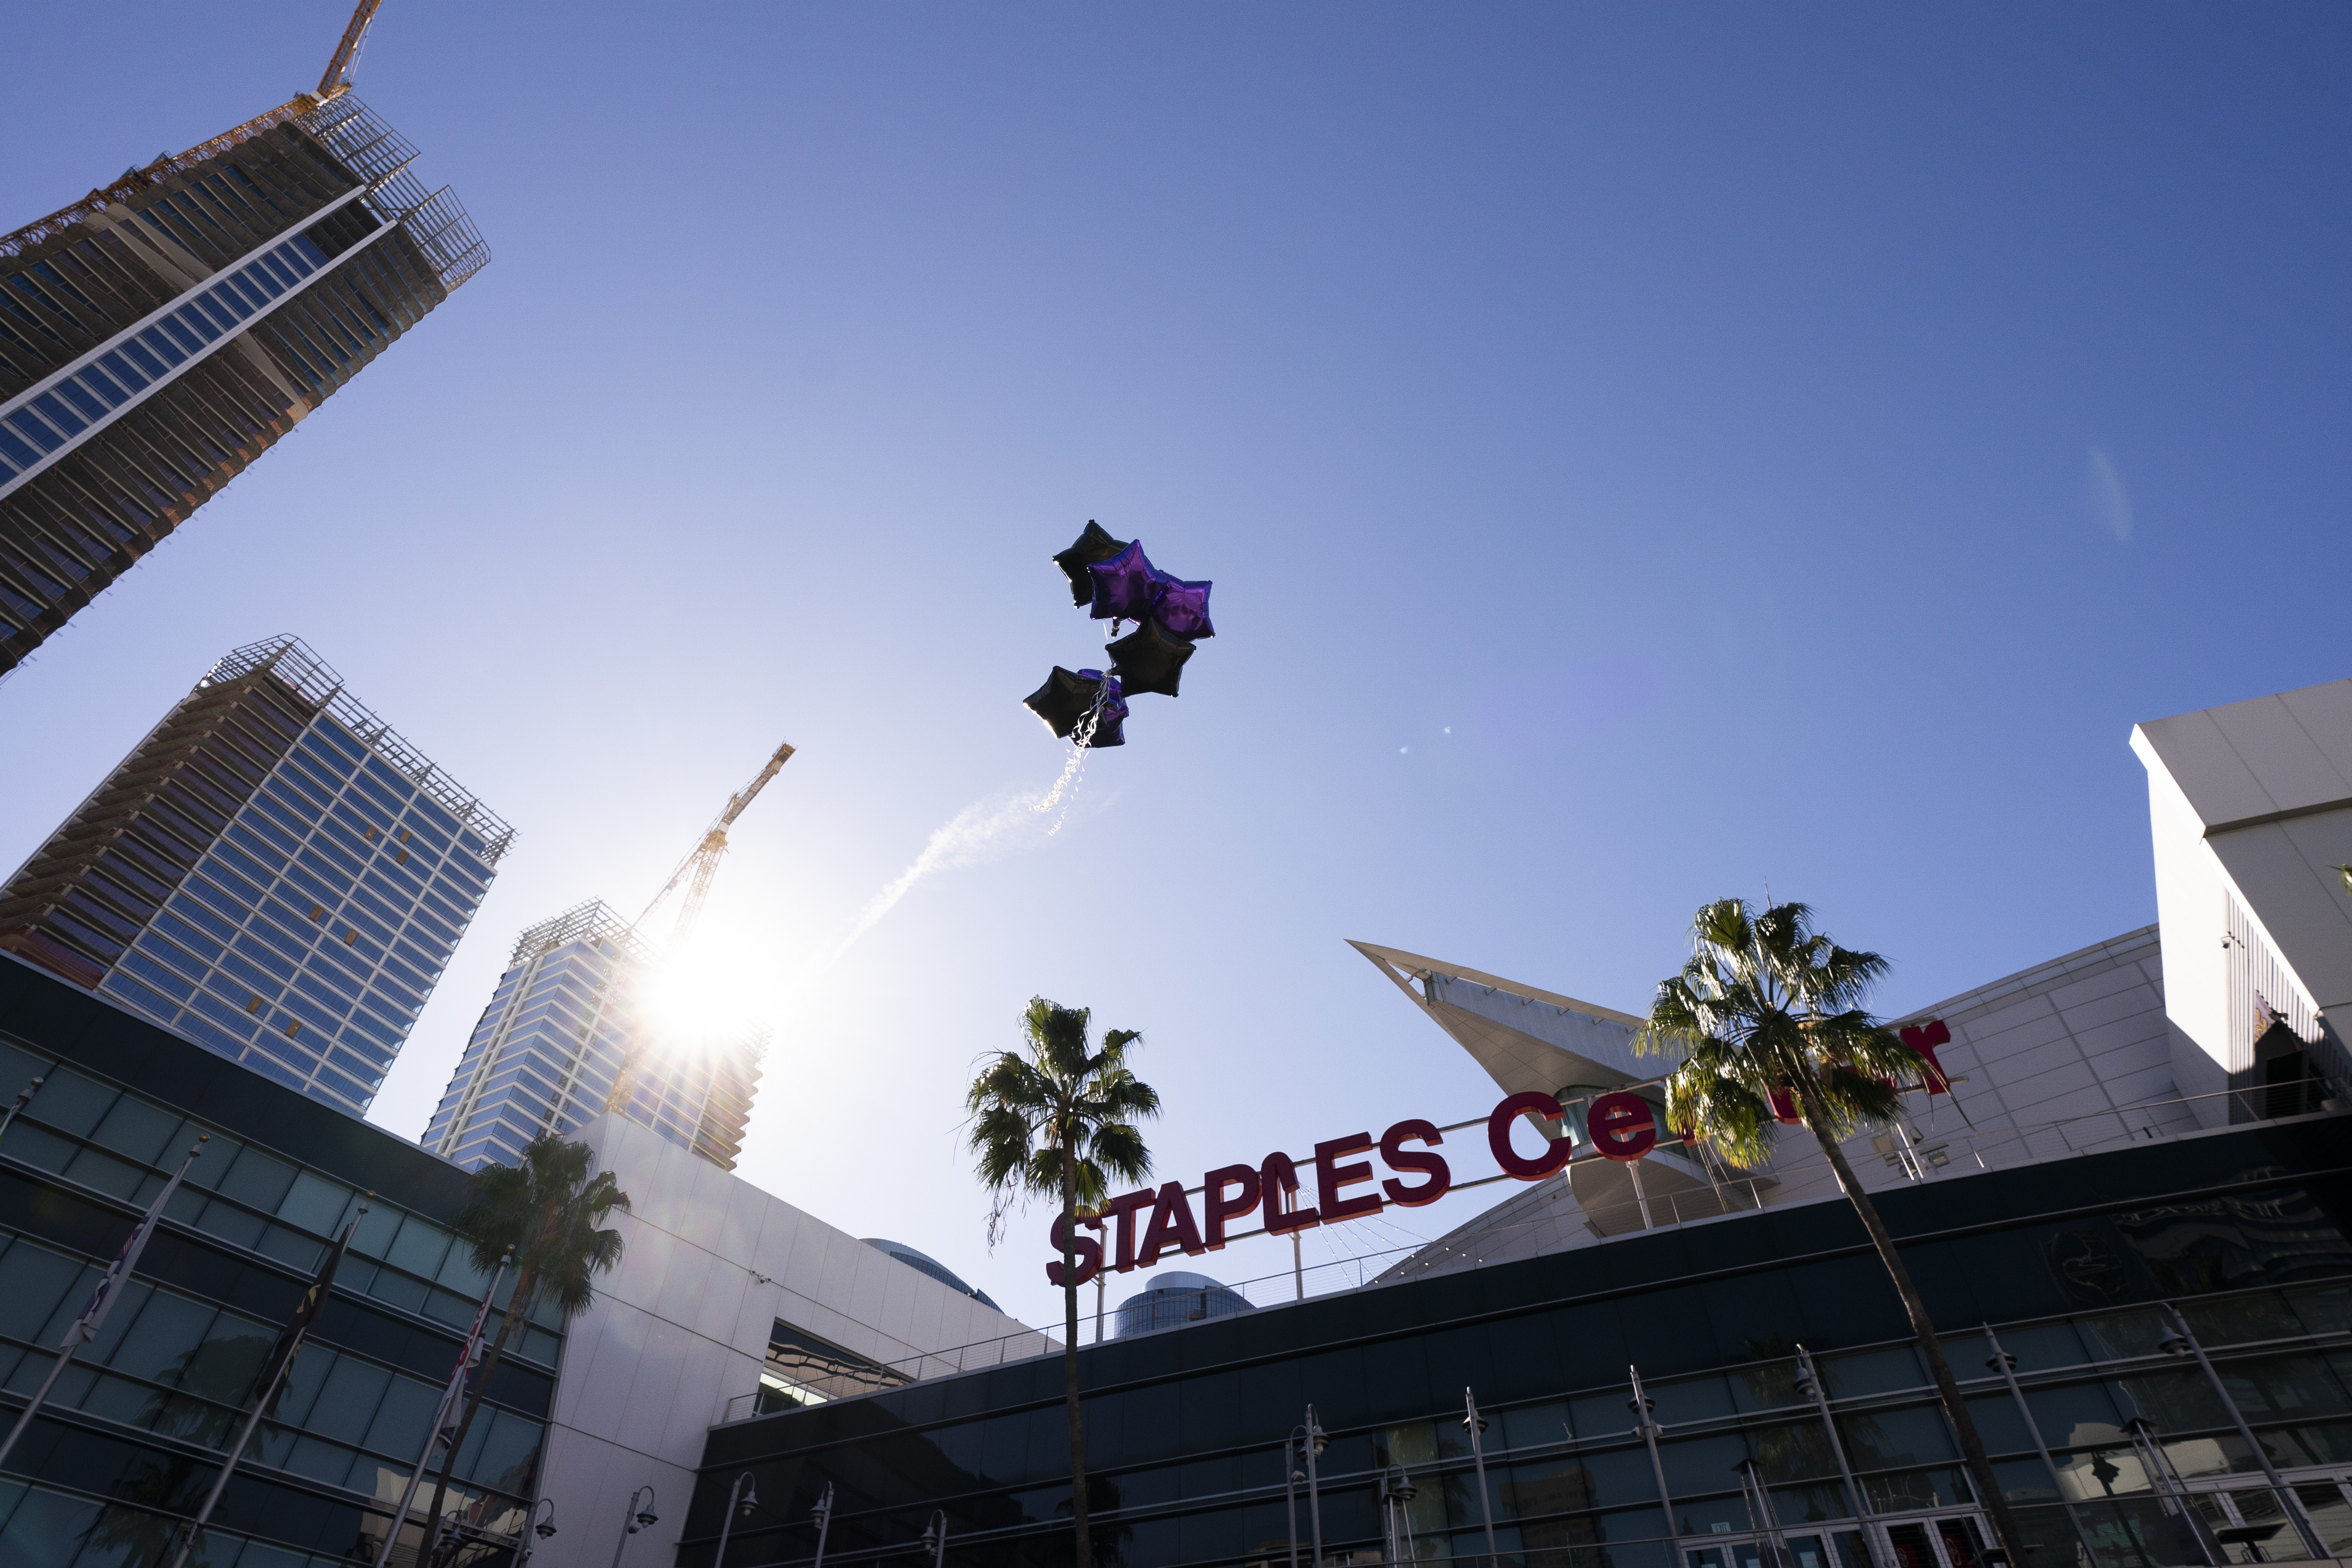 Name change coming for Staples Center in Los Angeles